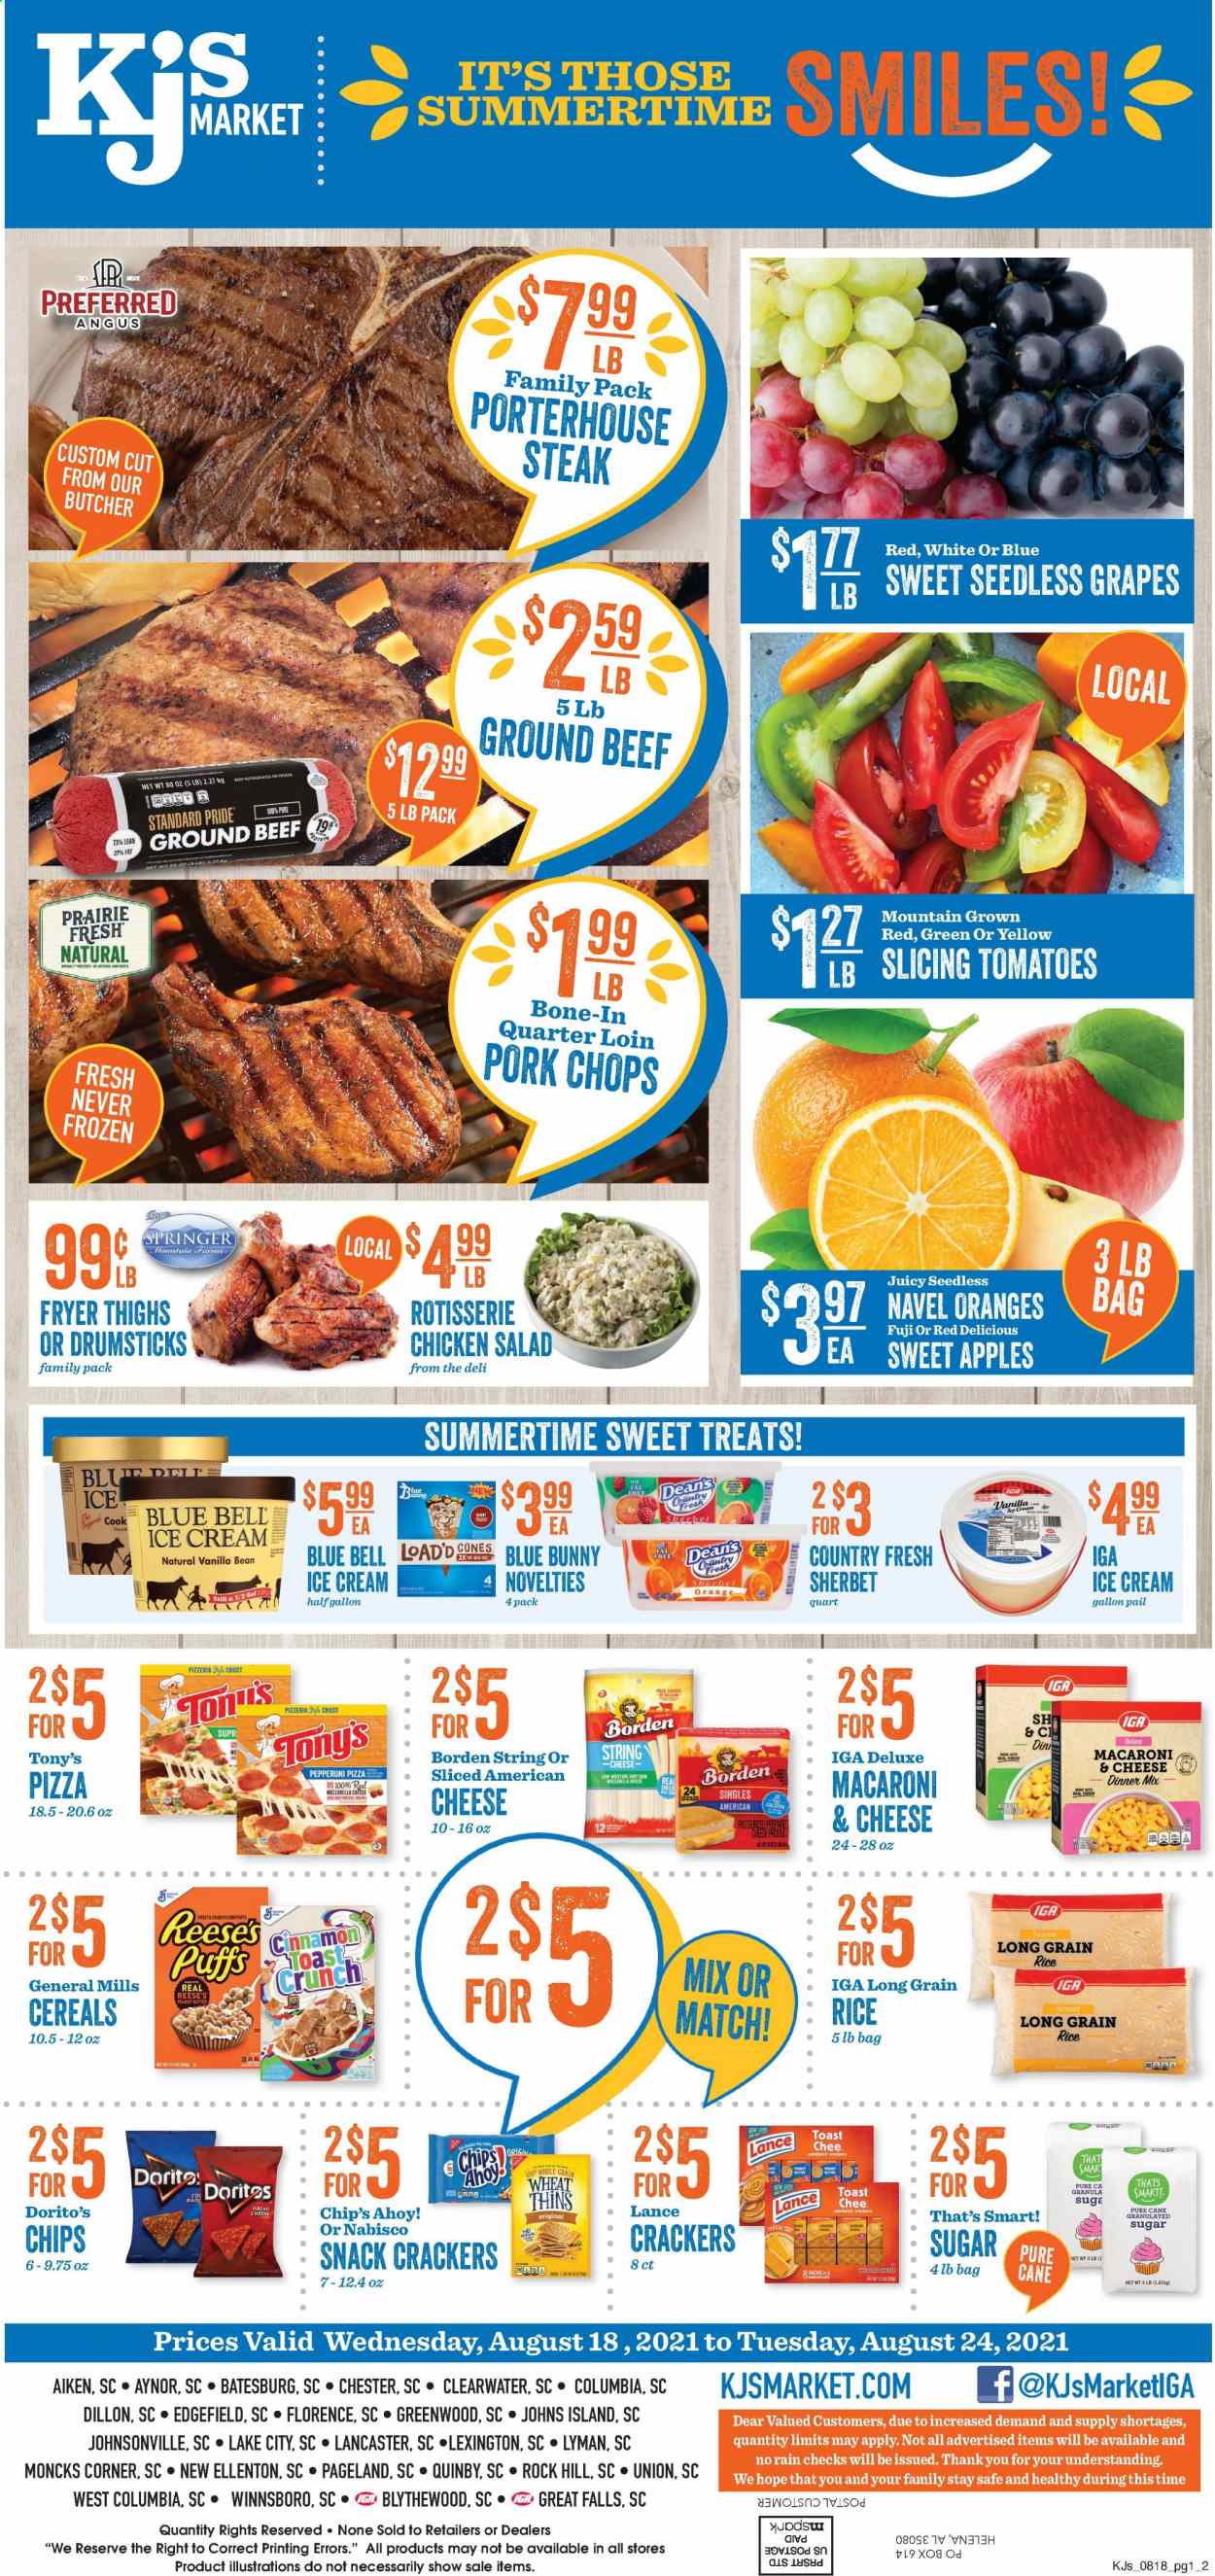 thumbnail - KJ´s Market Flyer - 08/18/2021 - 08/24/2021 - Sales products - seedless grapes, puffs, corn, salad, apples, grapes, Red Delicious apples, oranges, pizza, chicken roast, Johnsonville, pepperoni, chicken salad, ice cream, sherbet, Reese's, Blue Bell, Blue Bunny, Macaroni & Cheese Pizza, snack, crackers, Thins, sugar, cereals, rice, long grain rice, cinnamon, peanut butter, beef meat, ground beef, steak, pork chops, pork meat, calcium. Page 1.